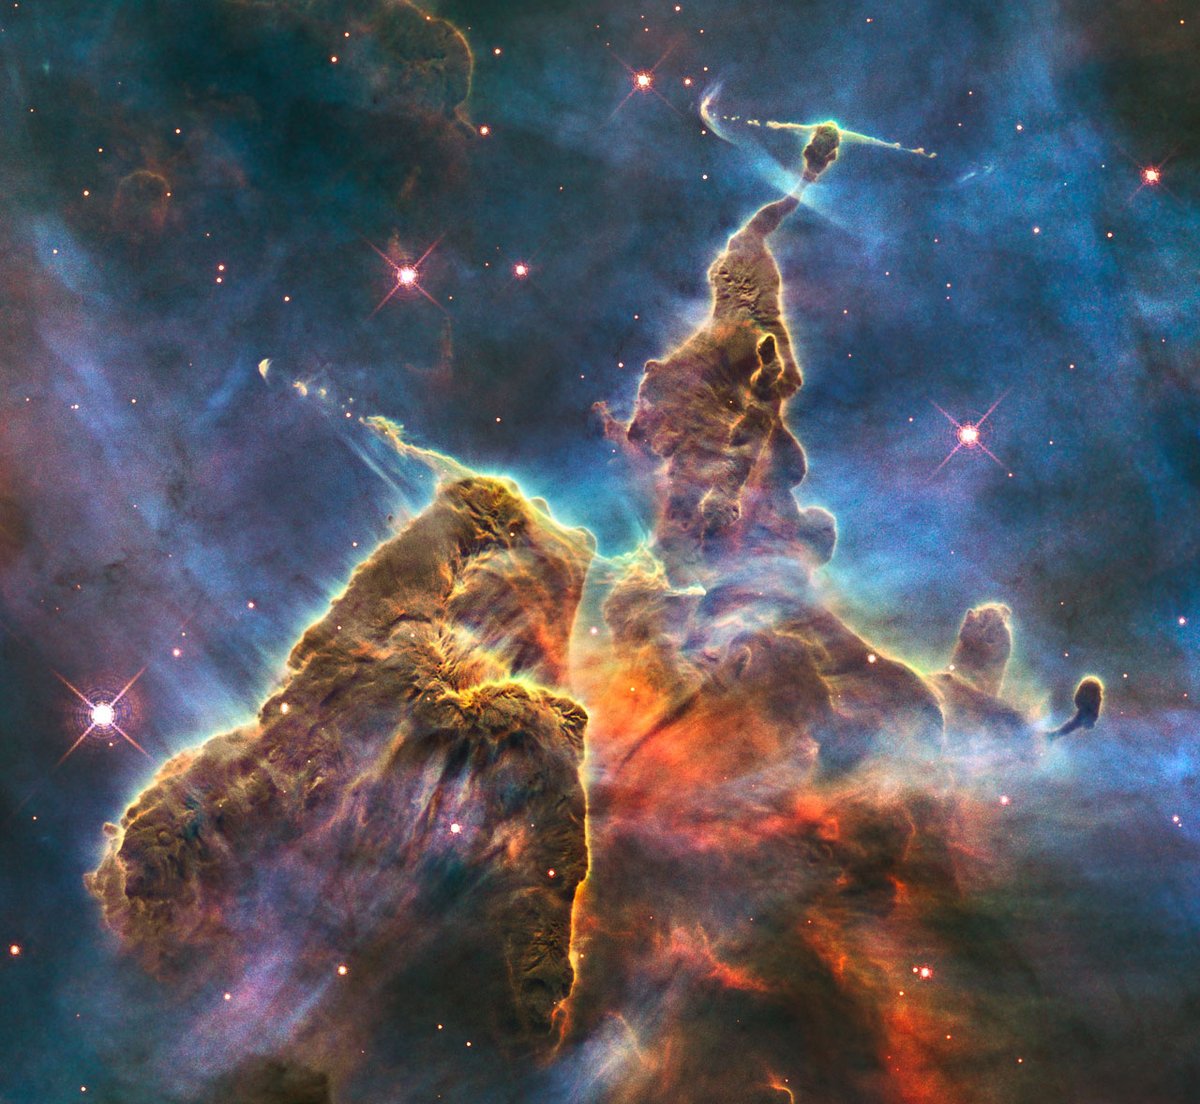 Welcome to Carina Nebula's “Mystic Mountain." This pillar of gas and dust is three light years tall! While it may look like sci-fi, as  @HUBBLE_space describes it, it's "even more dramatic than fiction." The rest of their description is just as poetic:  https://s.si.edu/2VbSYL7 